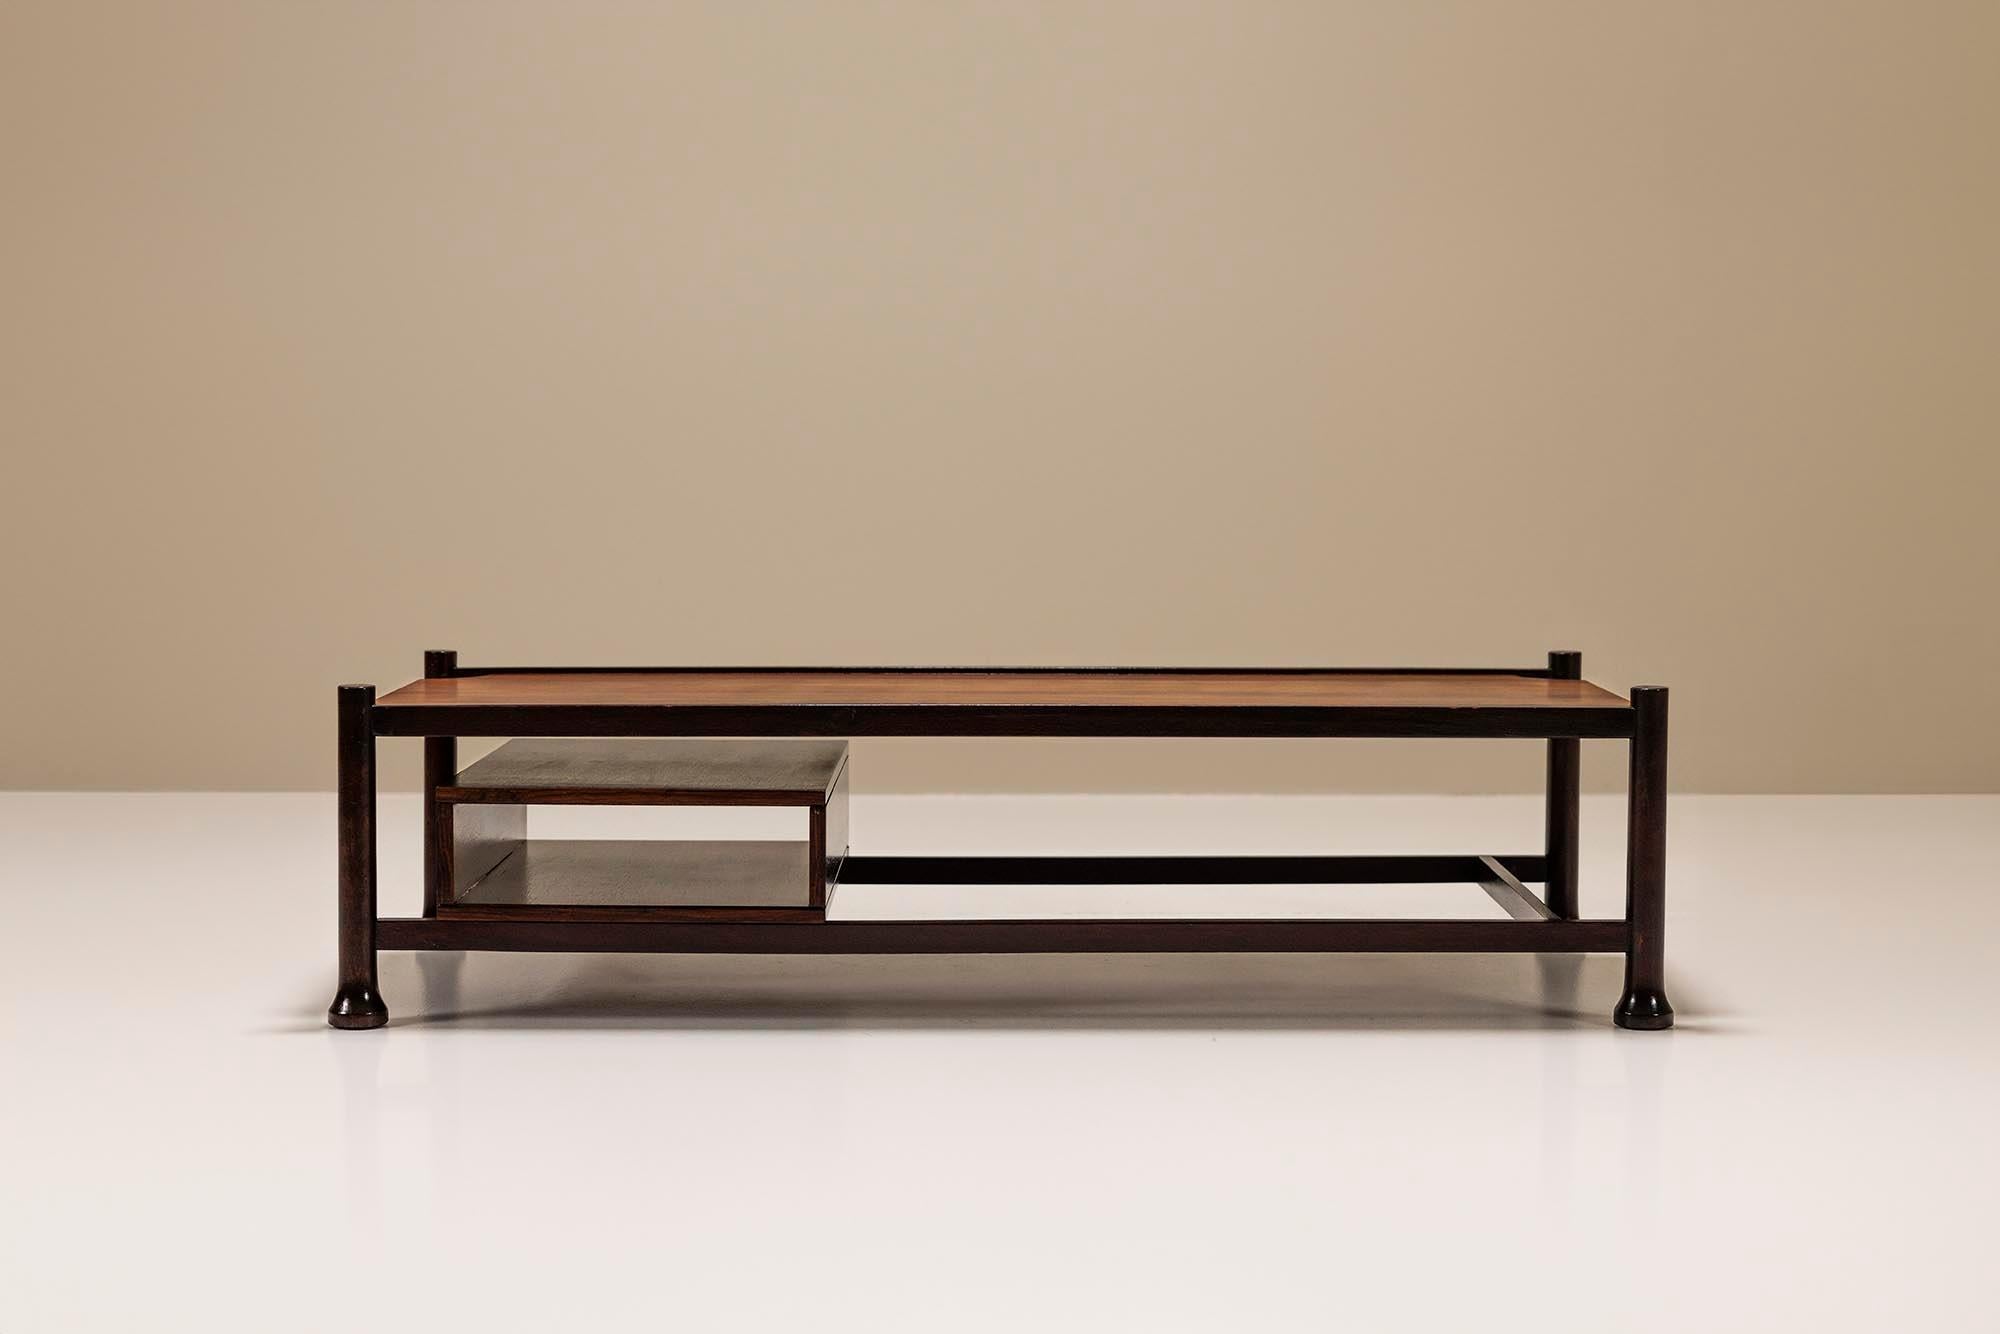 Rectangular coffee table veneered in rosewood.

At the first glance we see a lightness created by the clean lines of the frame. And the elongated rectangular shape creates an elegance as we know and maybe expect from Italian vintage furniture from